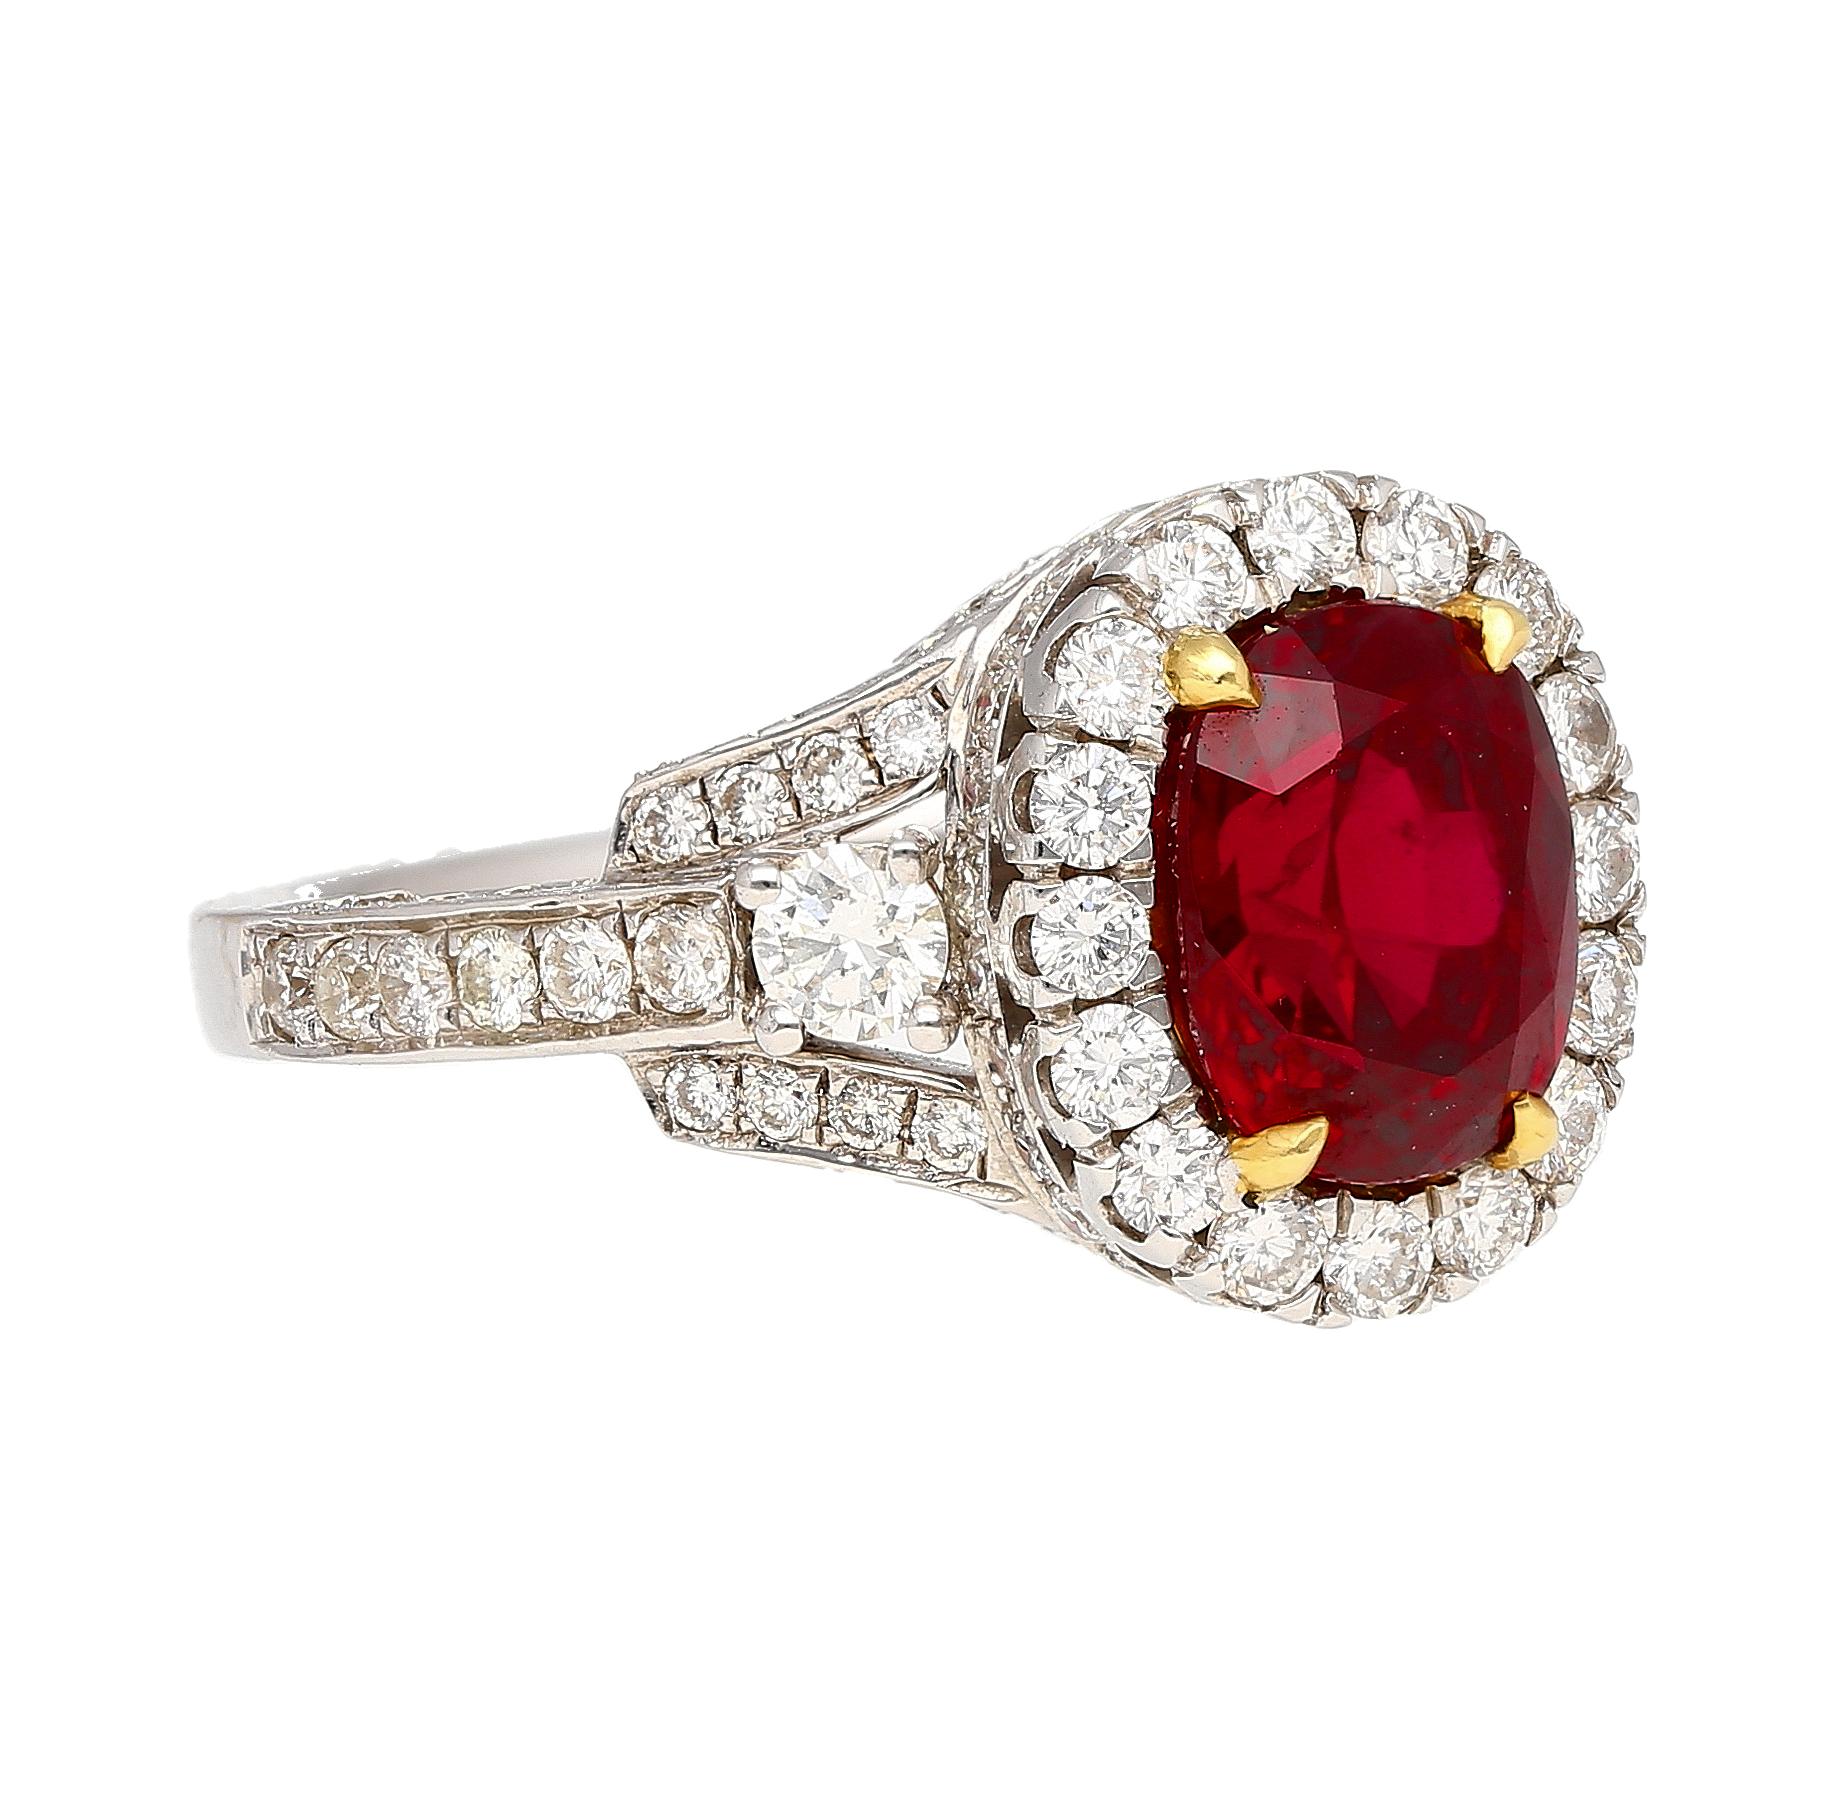 GRS certified 2.20 carat vivid red oval cut natural ruby ring. Crafted in 18K white & yellow gold, this exquisite piece showcases a center ruby of extraordinary Siam origin. 

This ring is unique in it's regal/retro aesthetic. The bezel and ring